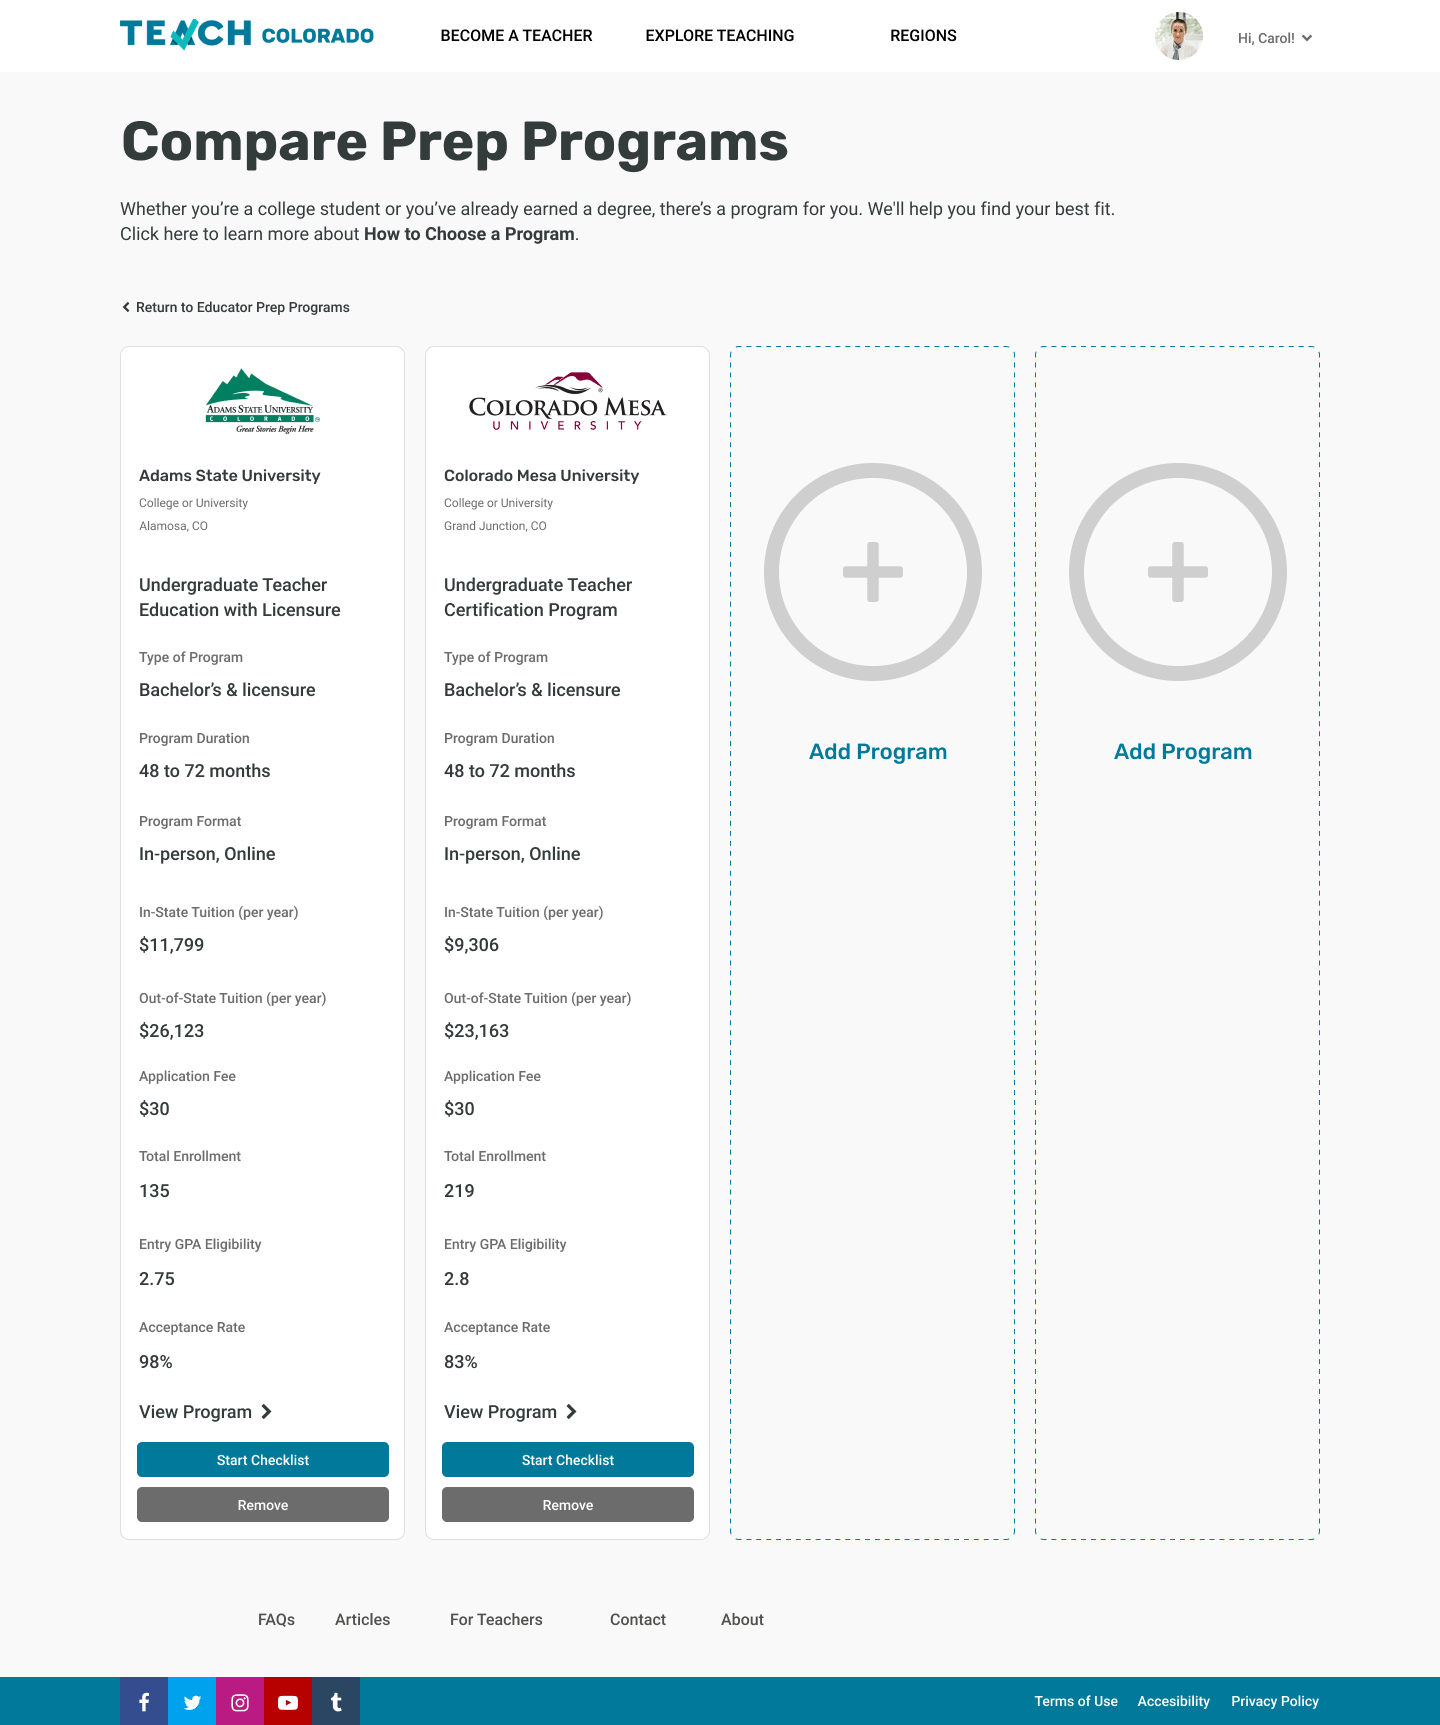 Compare page allows users to compare programs